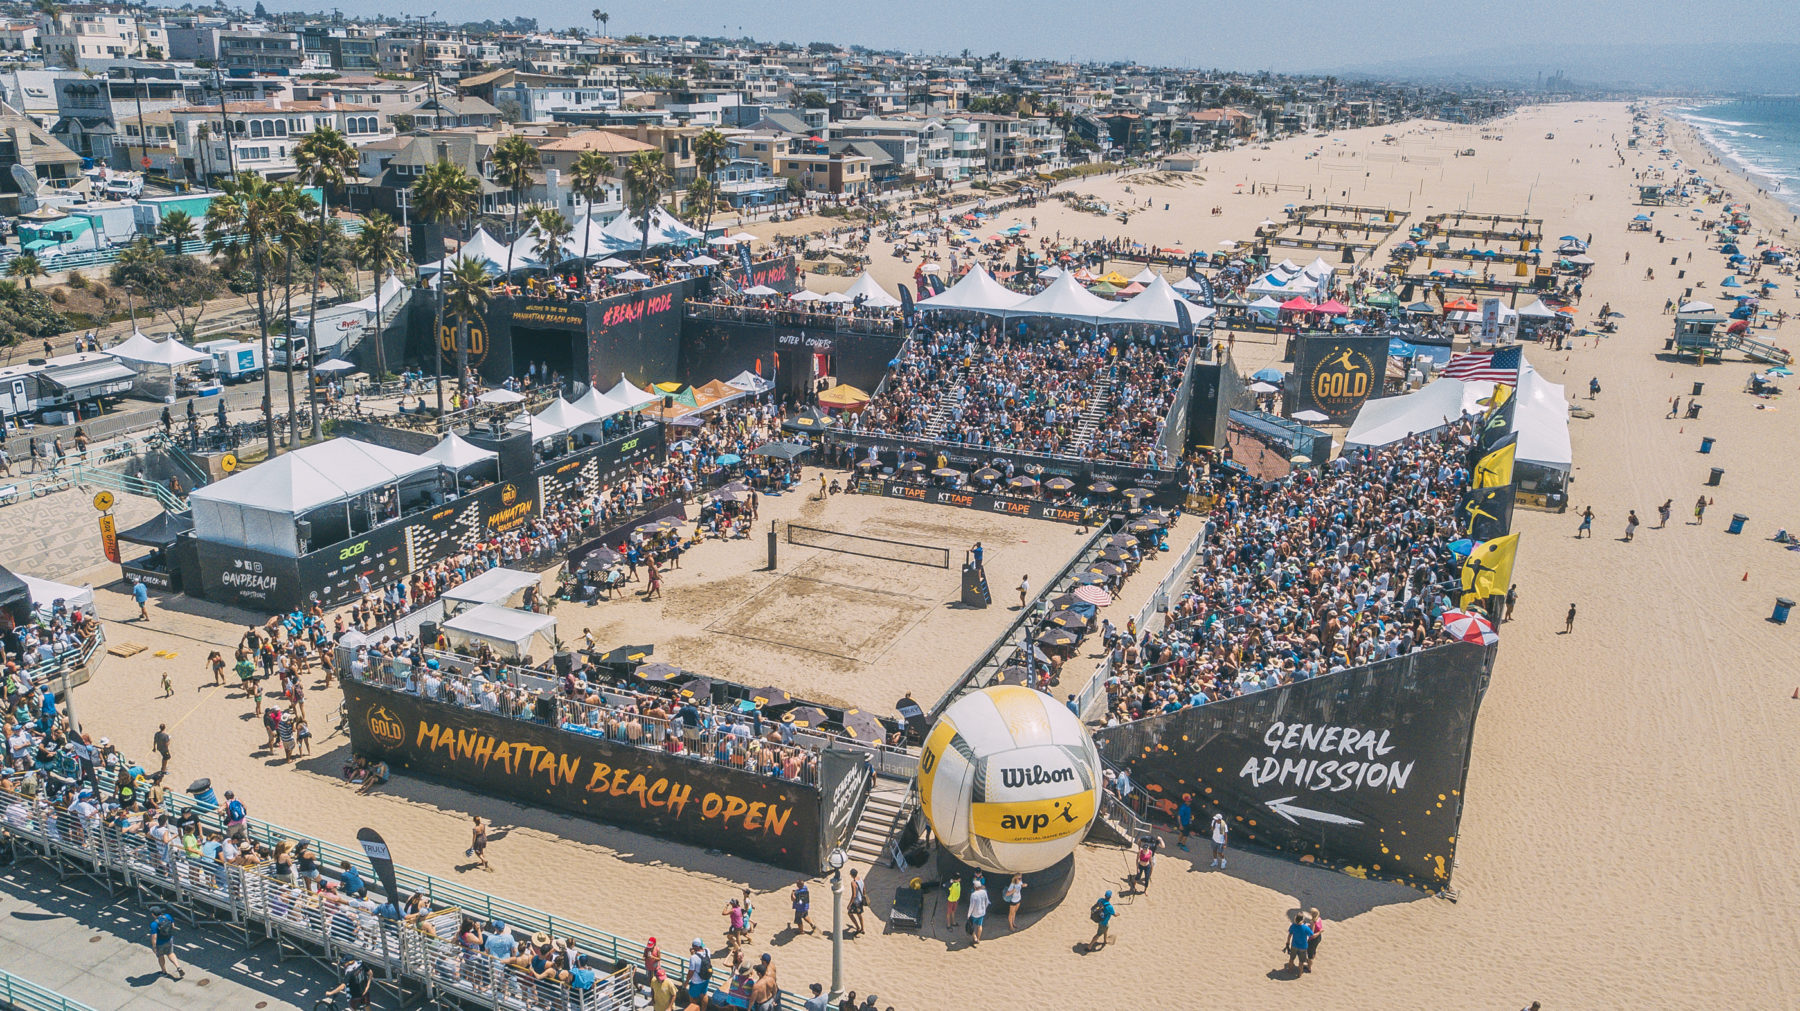 AVPNext Offers 8 Premier Events With 125,000 In Prize Money and 8 Wild